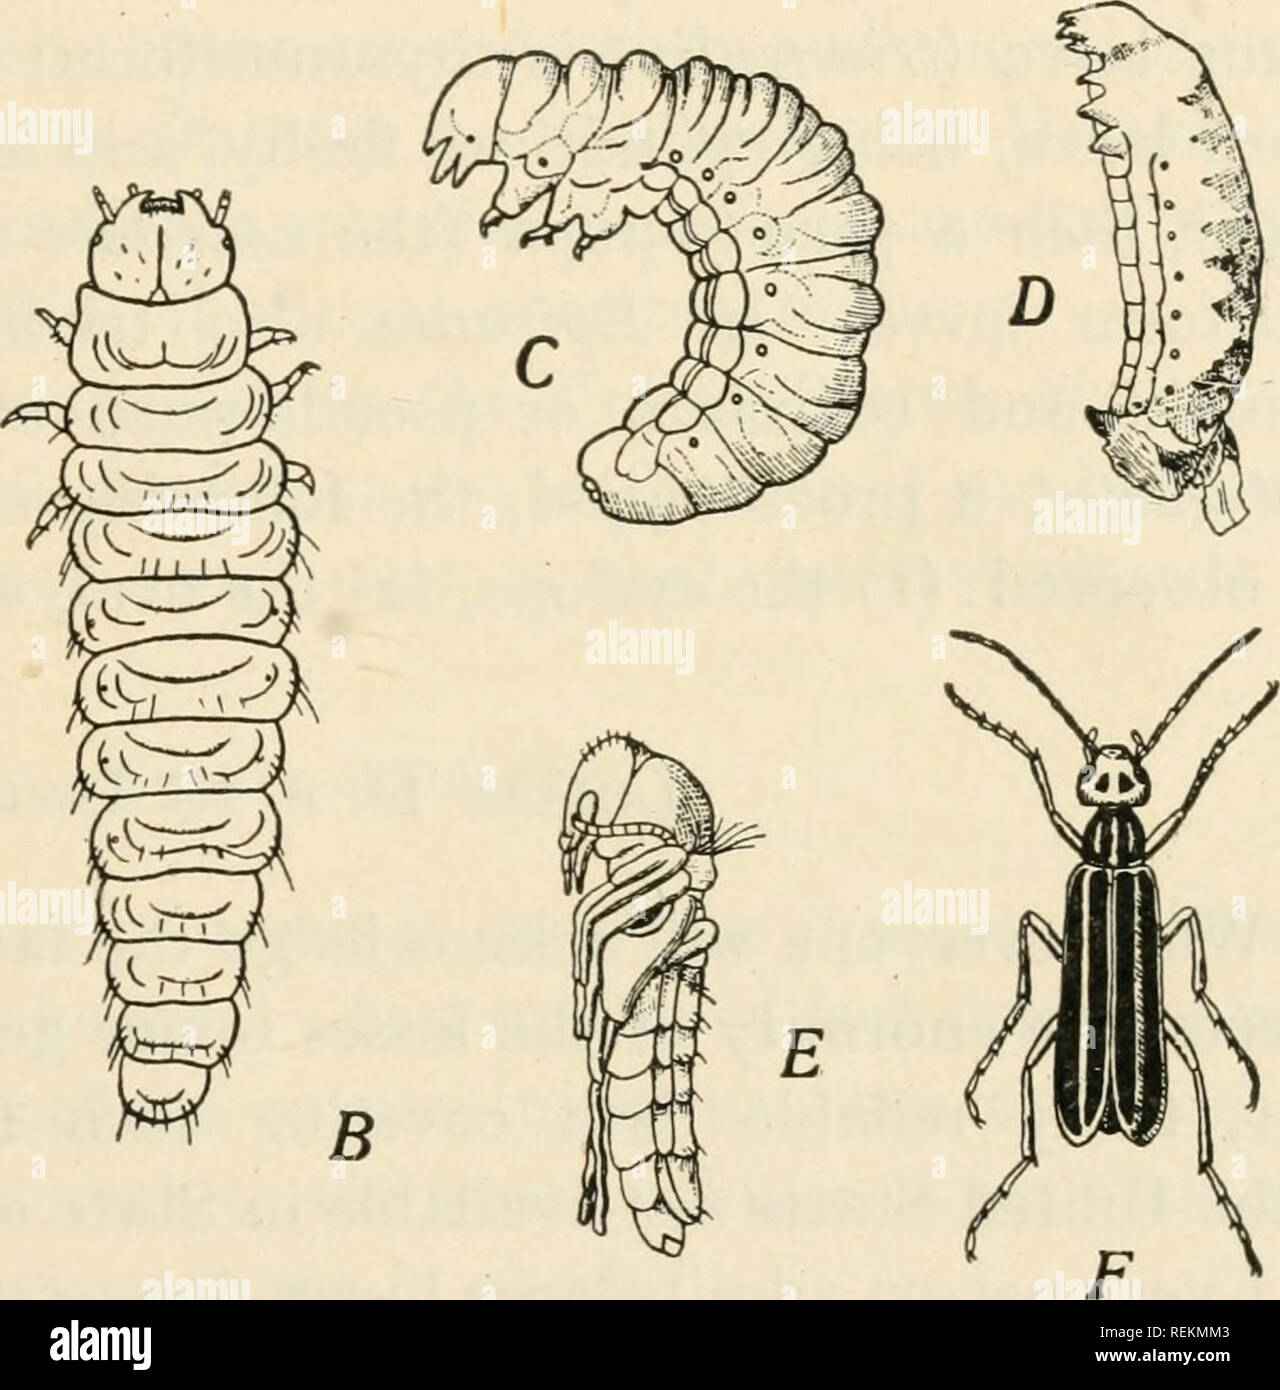 . Class book of economic entomology. Insects, Injurious and beneficial. [from old catalog]; Insects; Insects. Pig. 40.—Stages in the hypermetamorphosis of Epicauta. A, Triungulin; B, carabidoid stage of second larva; C, ultimate stageJof second larva; D, coarctate larva; E, pupa; F, imago. E is species cinerea; the others are vittata. All enlarged except F. (After Riley, from Trans. St. Louis Acad. Science.) of the larval organs are reconstructed into imaginal or adult tissues. The imaginal organs arise from embryonal tissues (the imaginal buds) which for the most part remain practically dorma Stock Photo